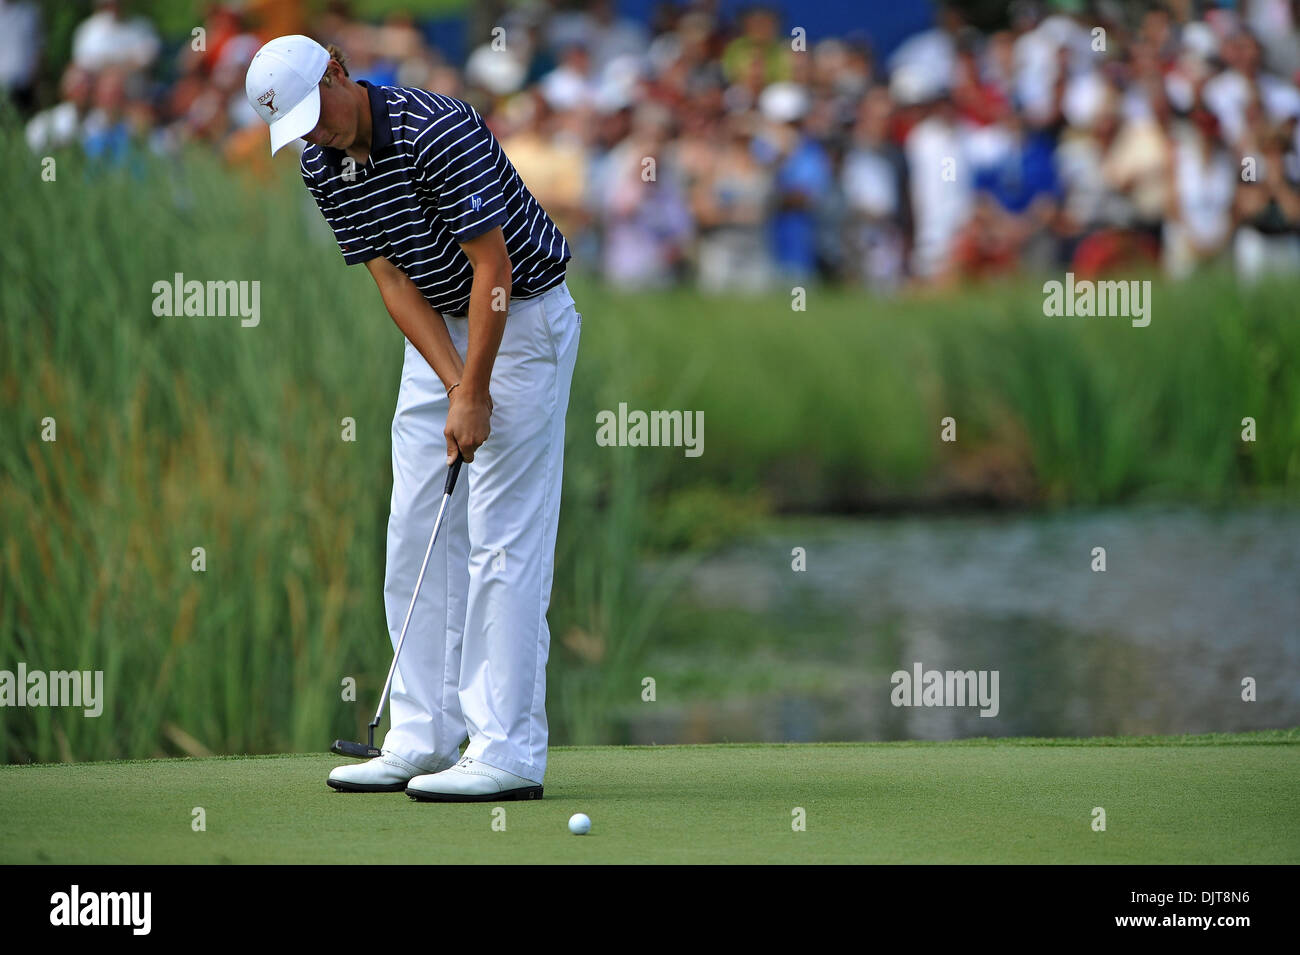 Jordan Spieth putts at the 17th hole during the HP Byron Nelson Championship at TPC Four Seasons Resort Las Colinas in Irving, Texas  (Credit Image: © Patrick Green/Southcreek Global/ZUMApress.com) Stock Photo